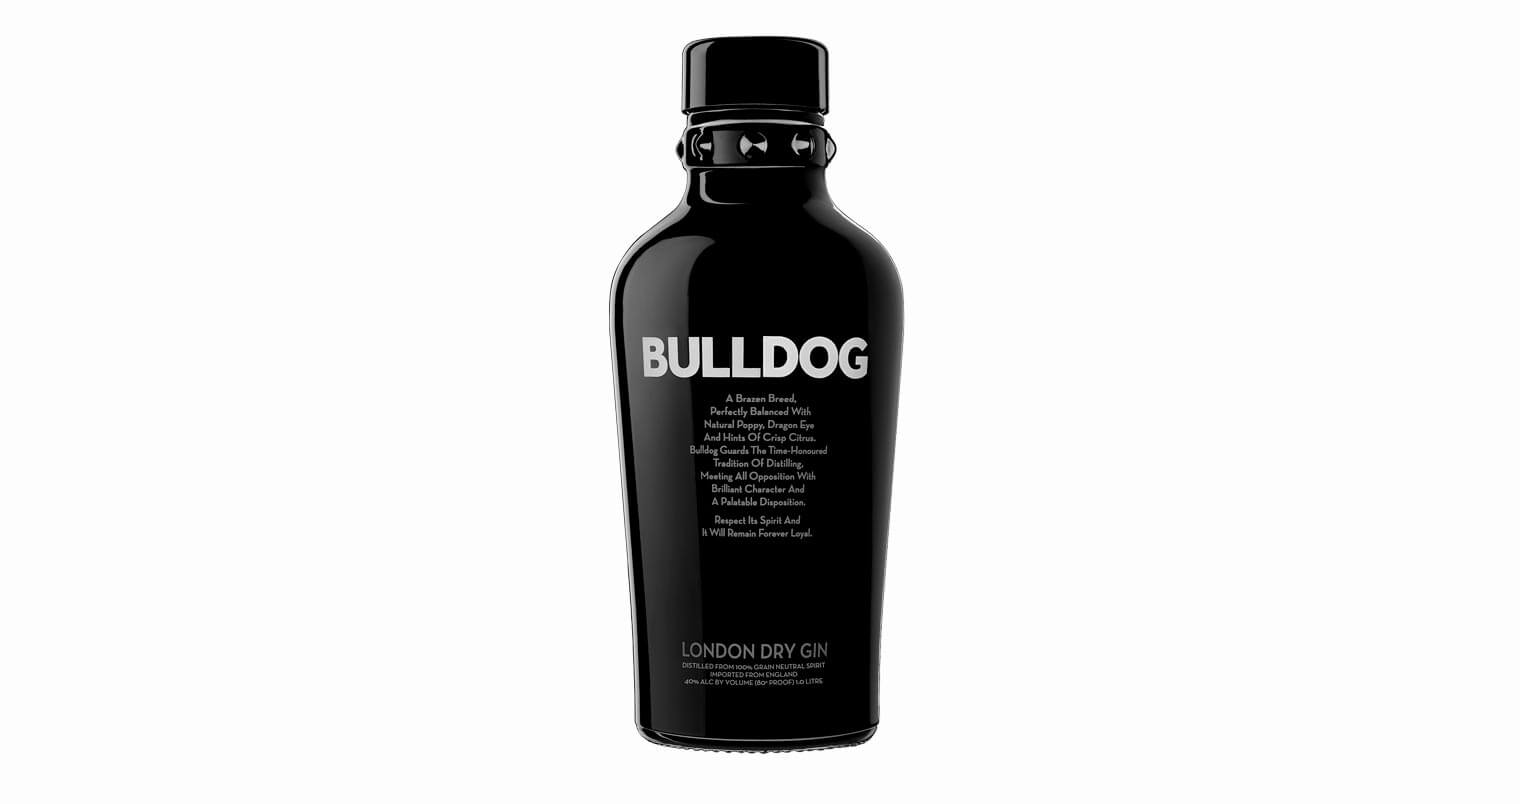 Bulldog Gin Confirmed World's Fastest Growing Premium Gin, featured image